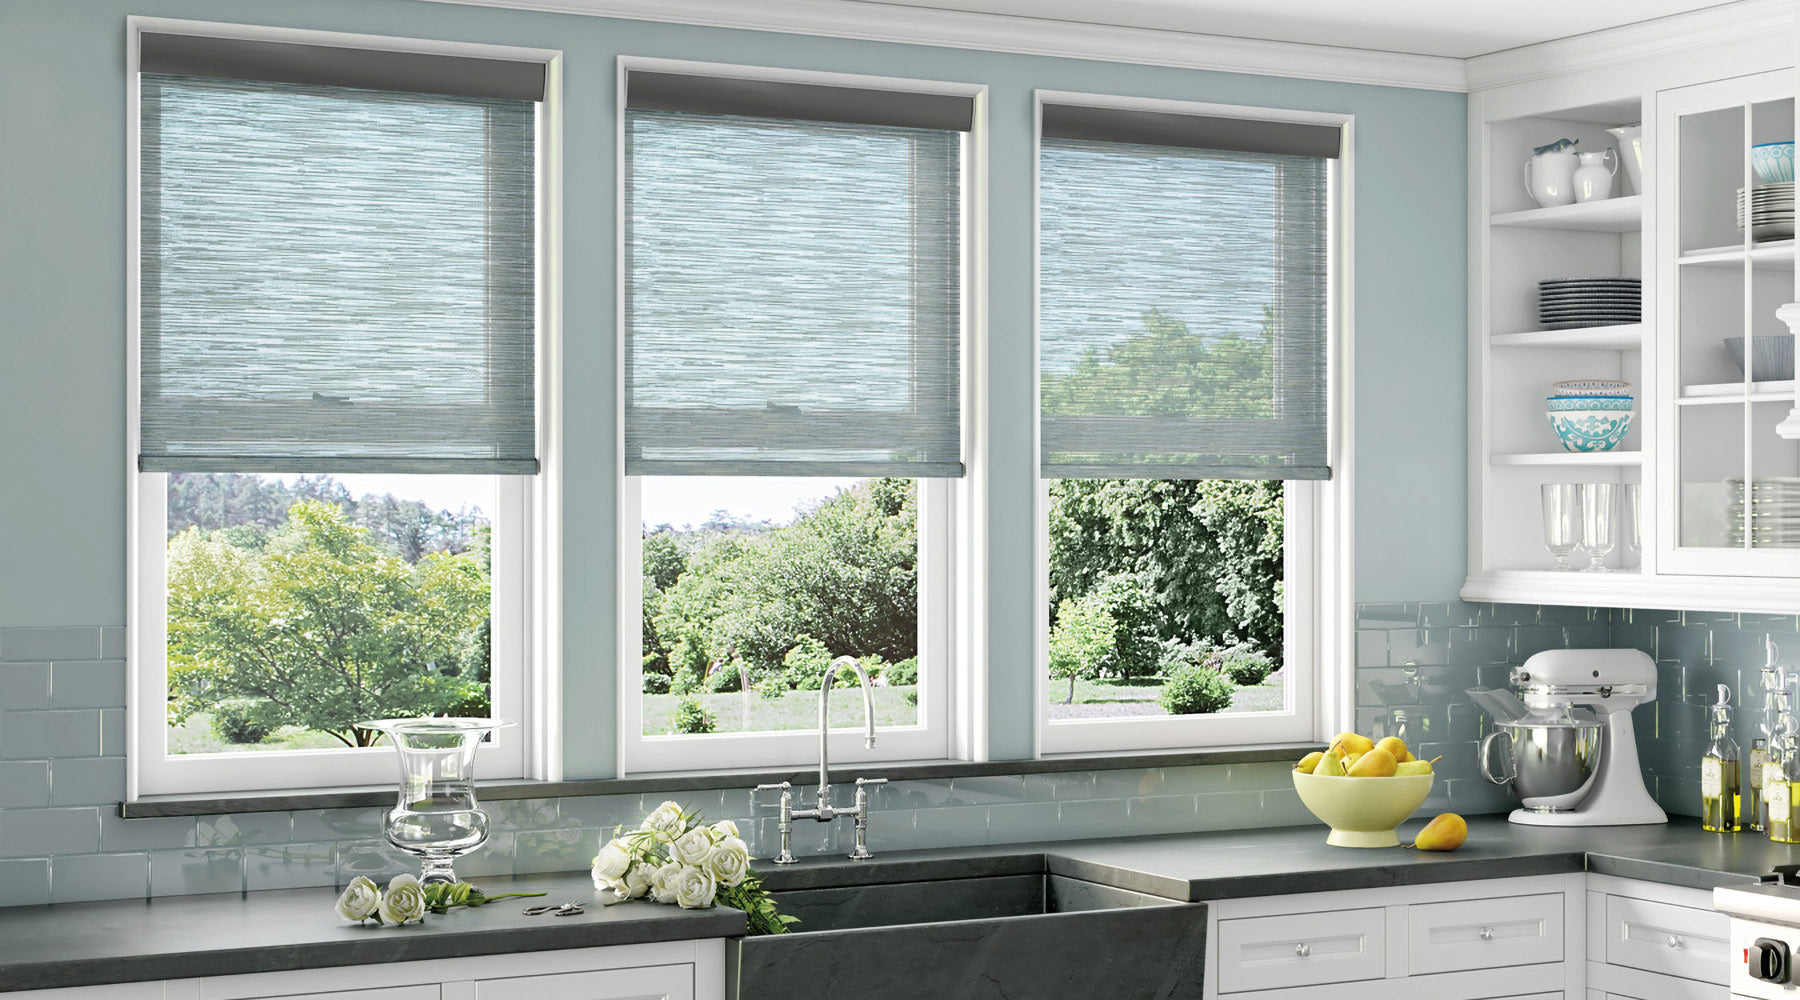 shop custom window treatments at Regal Paint Cetners. Modern kitchen with gray/blue walls, white cabinets, and modern light filter window shades.